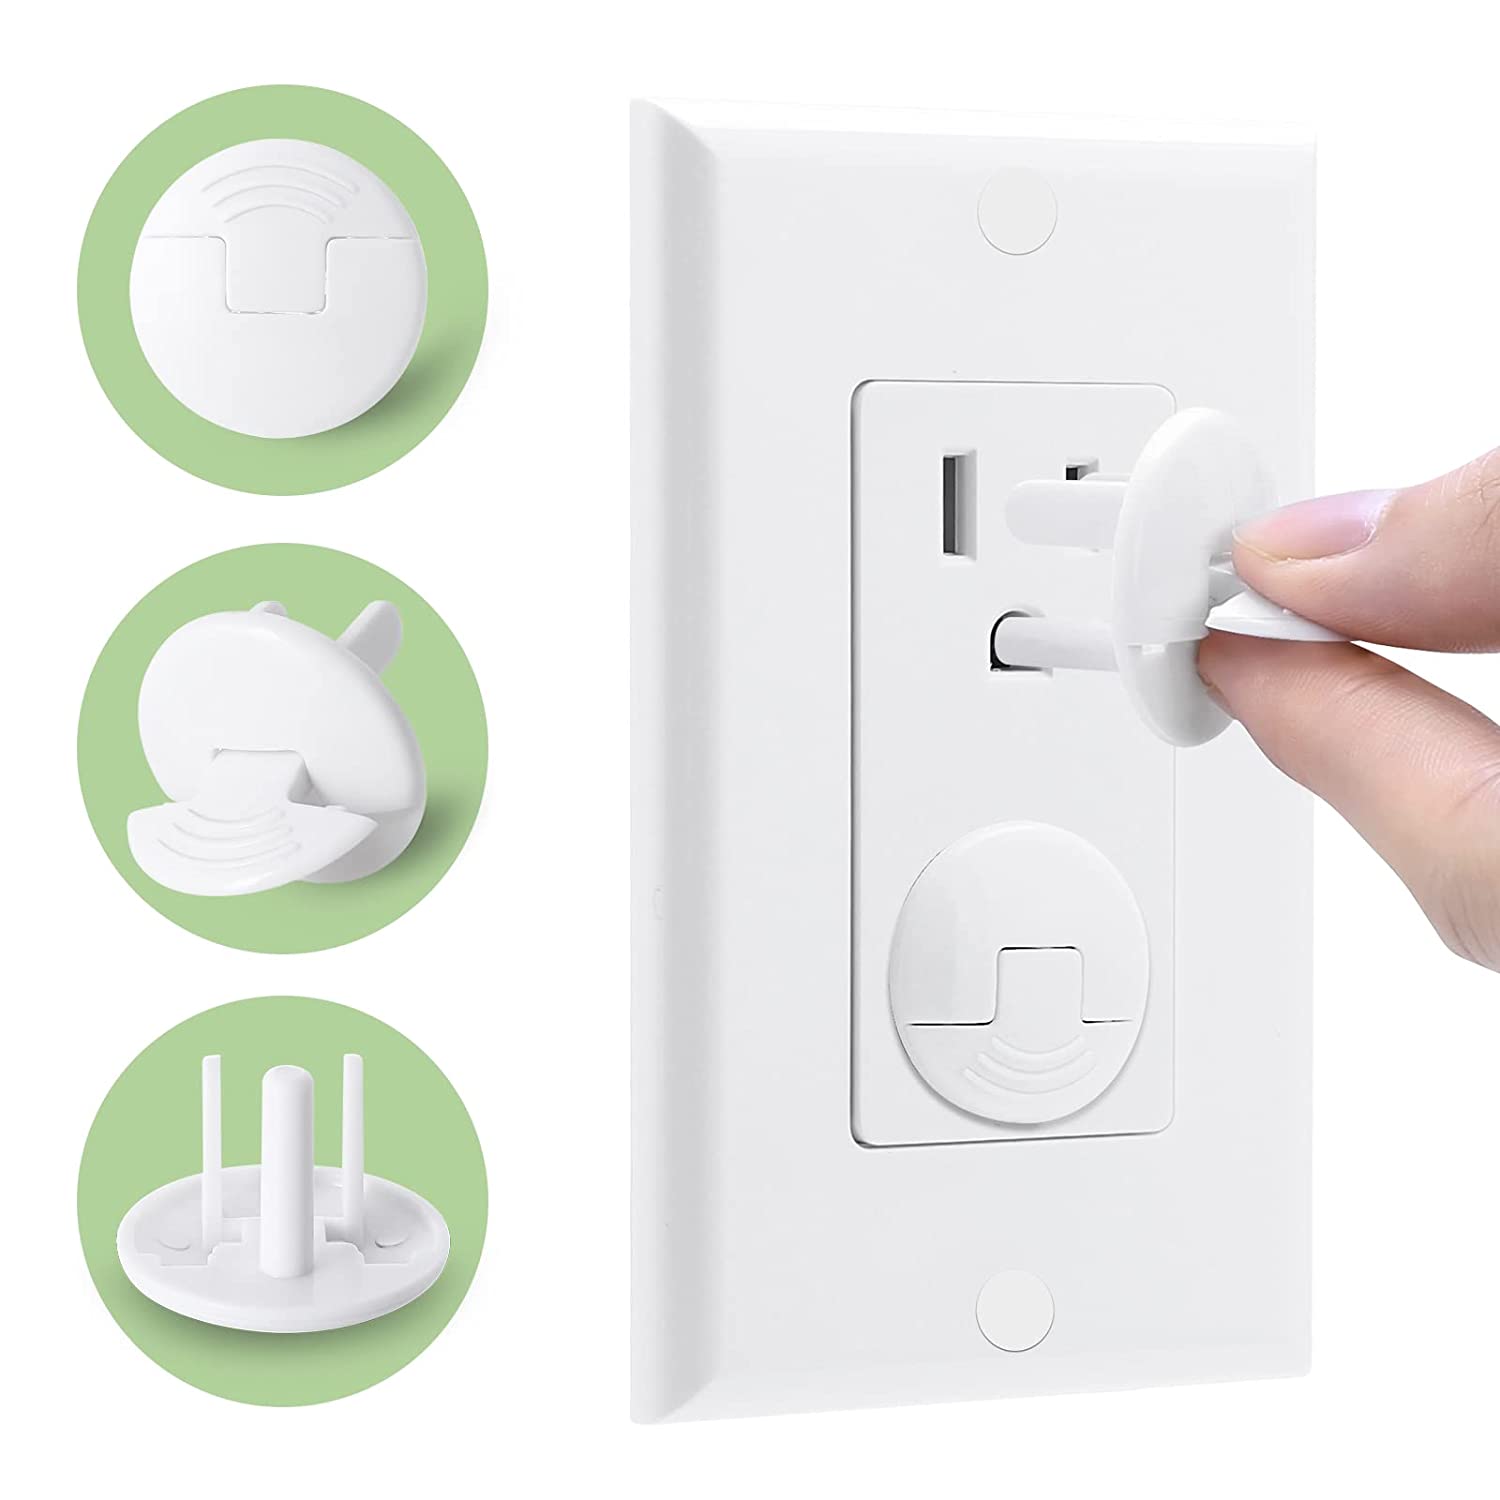 Baby proofing Outlet Plugs, PRObebi No Easy to Remove by Children Keep Prevent Baby from Accidental Shock Hazard